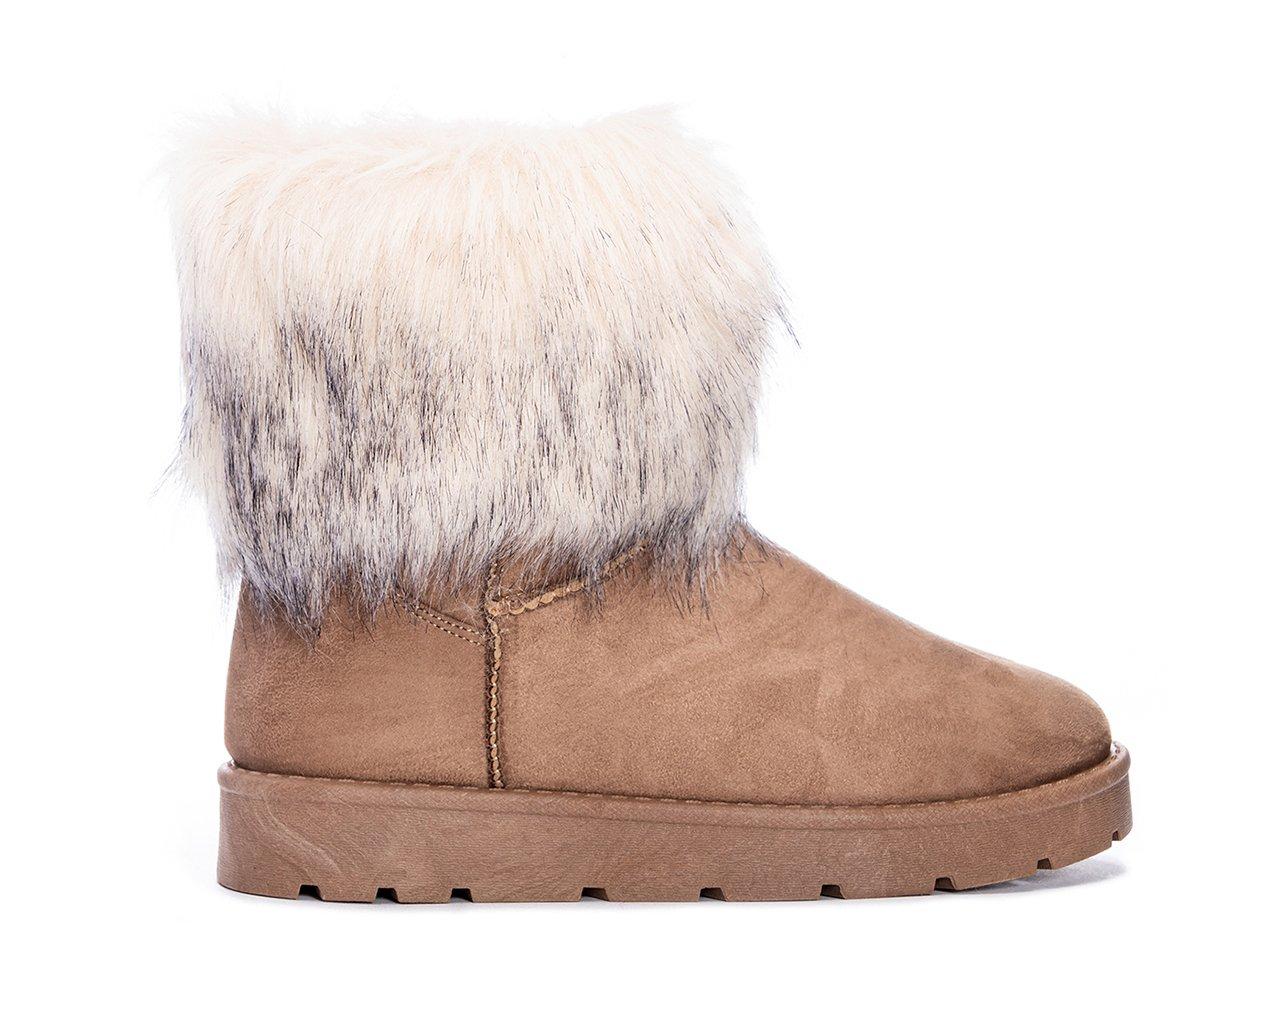 Women's Dirty Laundry Sugar Hill Winter Boots